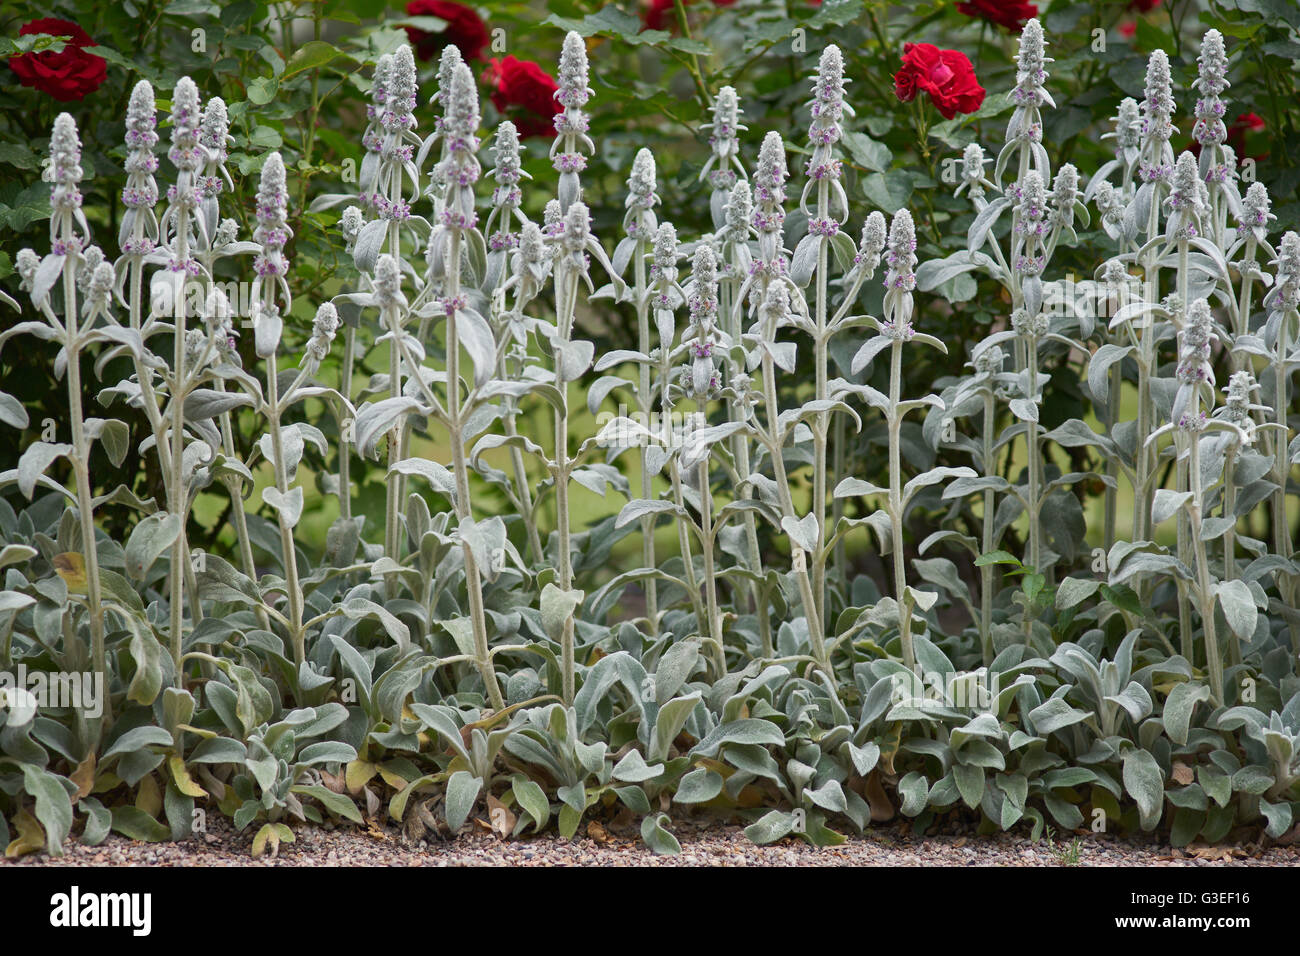 Lamb's ears in full bloom blooming Stachys byzantina Stock Photo